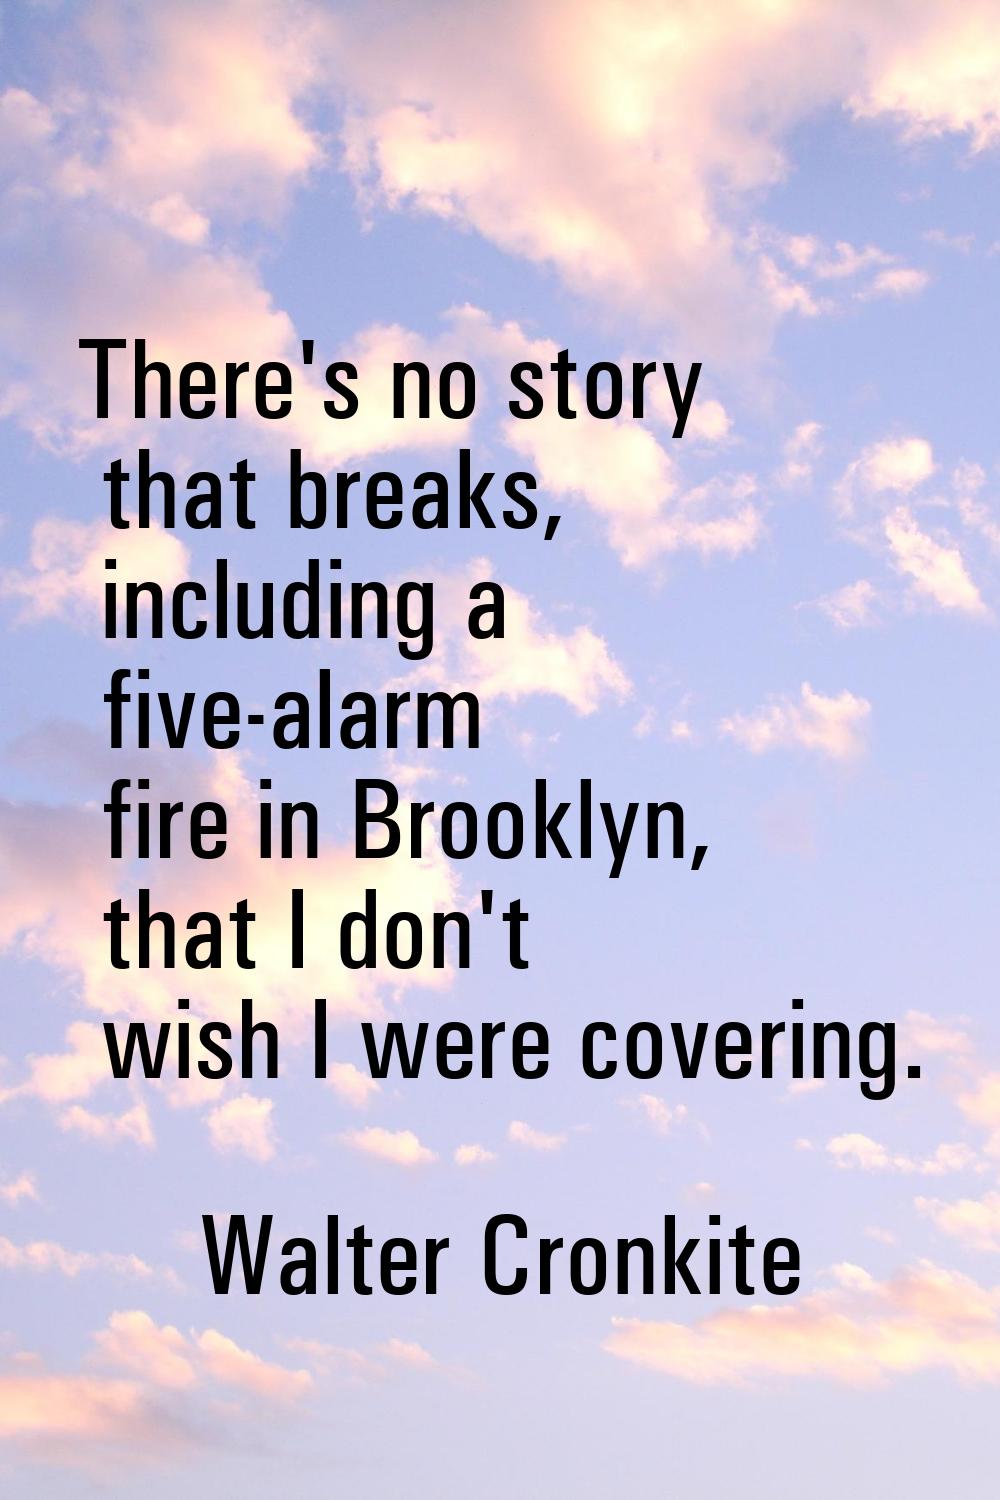 There's no story that breaks, including a five-alarm fire in Brooklyn, that I don't wish I were cov